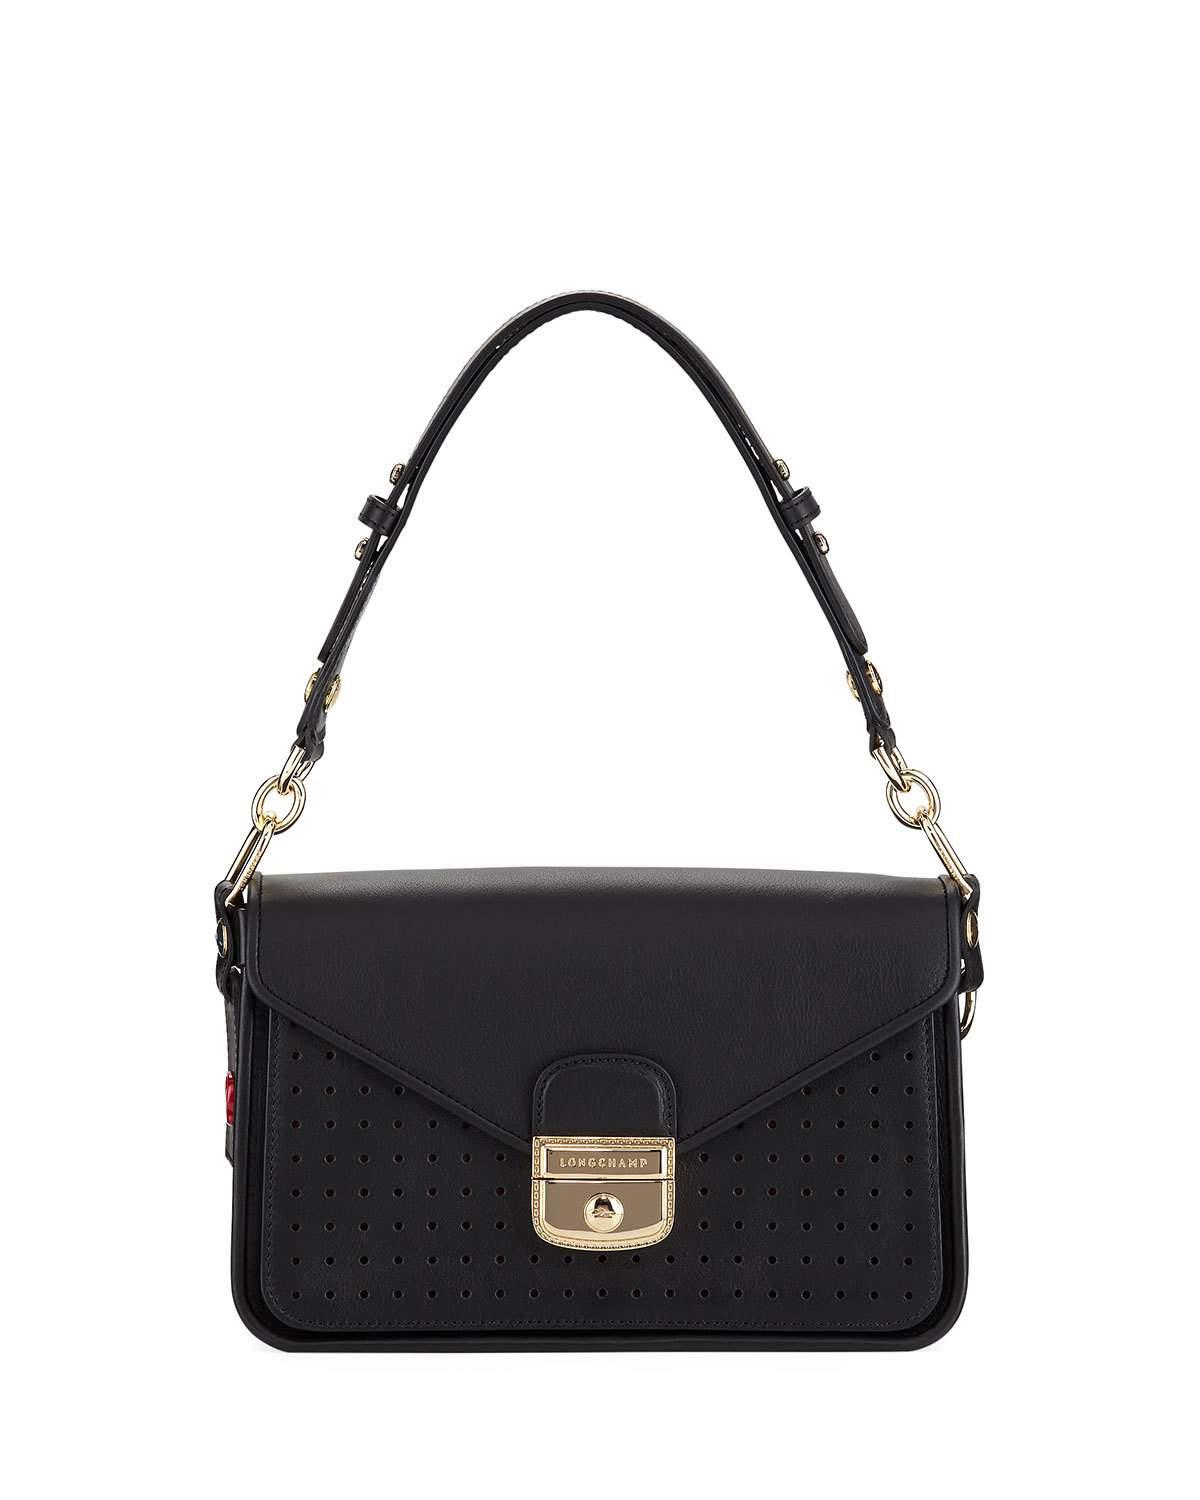 Longchamp Mademoiselle Perforated Leather Crossbody Bag in Black - Lyst